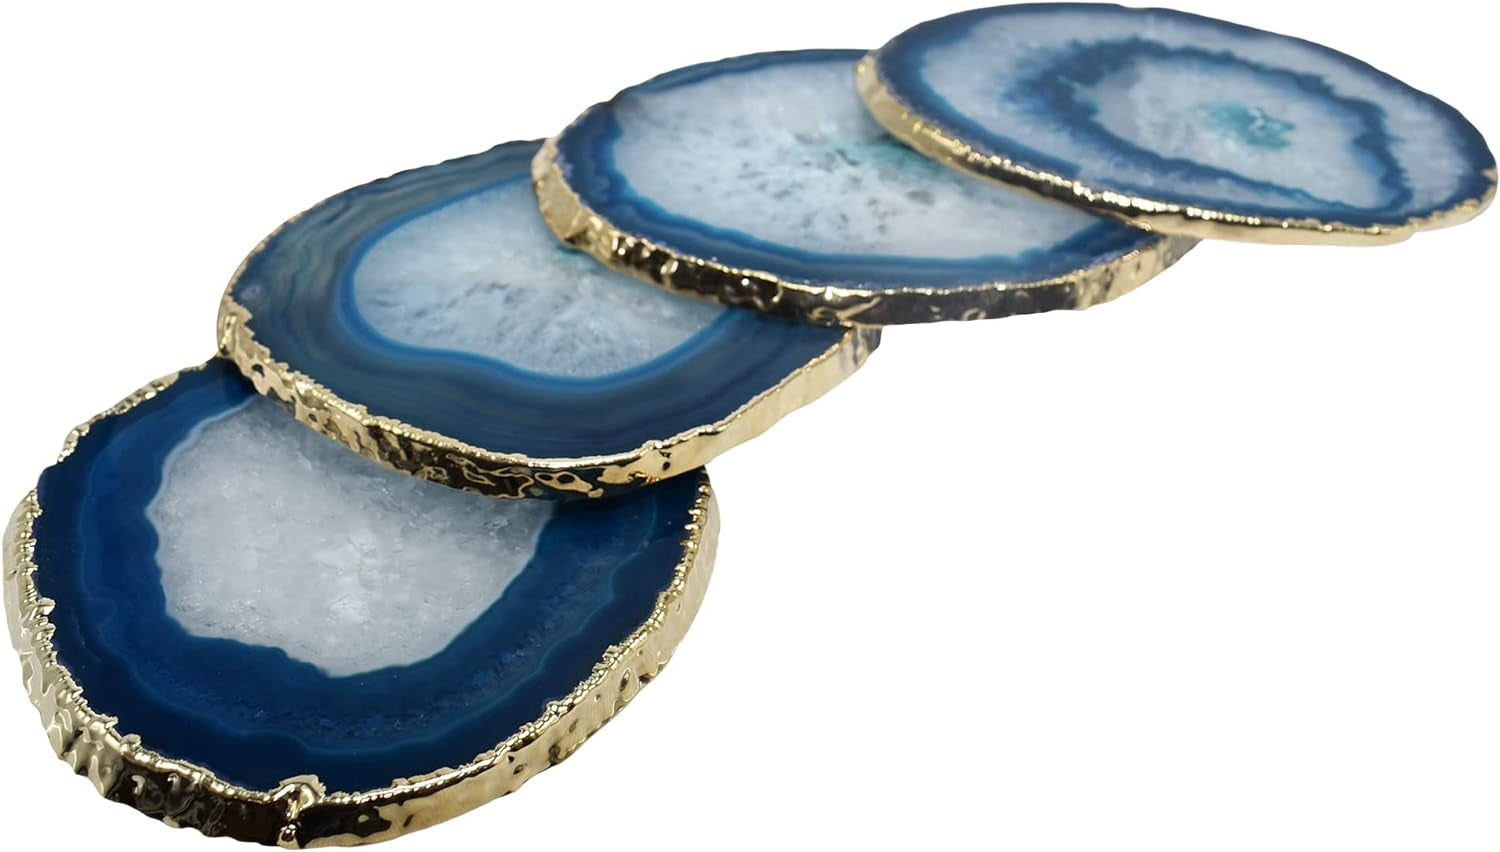 Premium Teal Gold Rimmed Agate Coasters - Set of 4, Genuine Stone Table Mats for Dining & Drinks Coffee Table & Kitchen Geode Decor Non-Toxic 4.5-5" Diameter